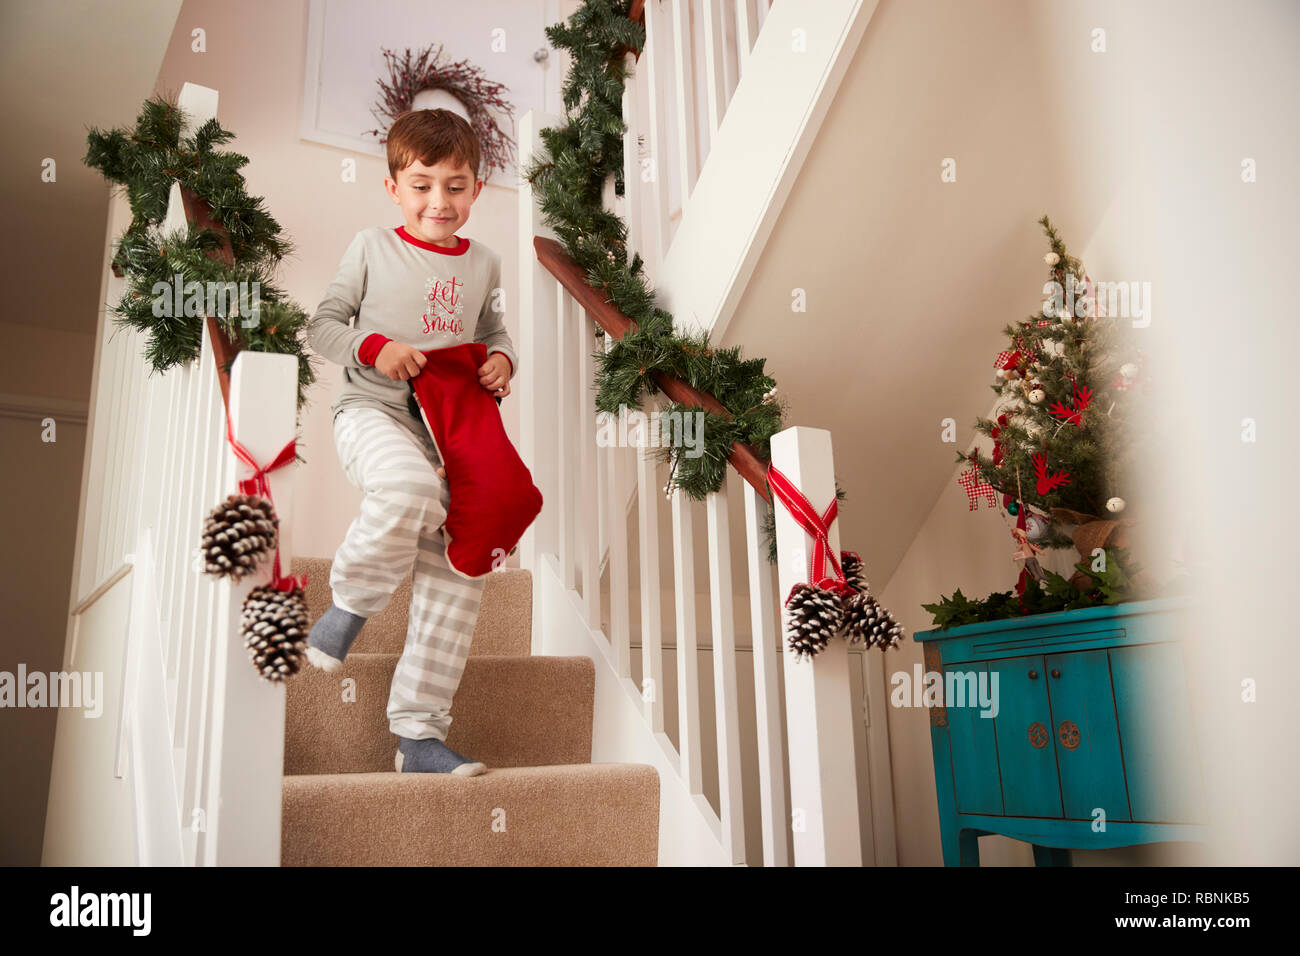 Excited Boy Wearing Pajamas Running Down Stairs Holding Stocking On Christmas Morning Stock Photo